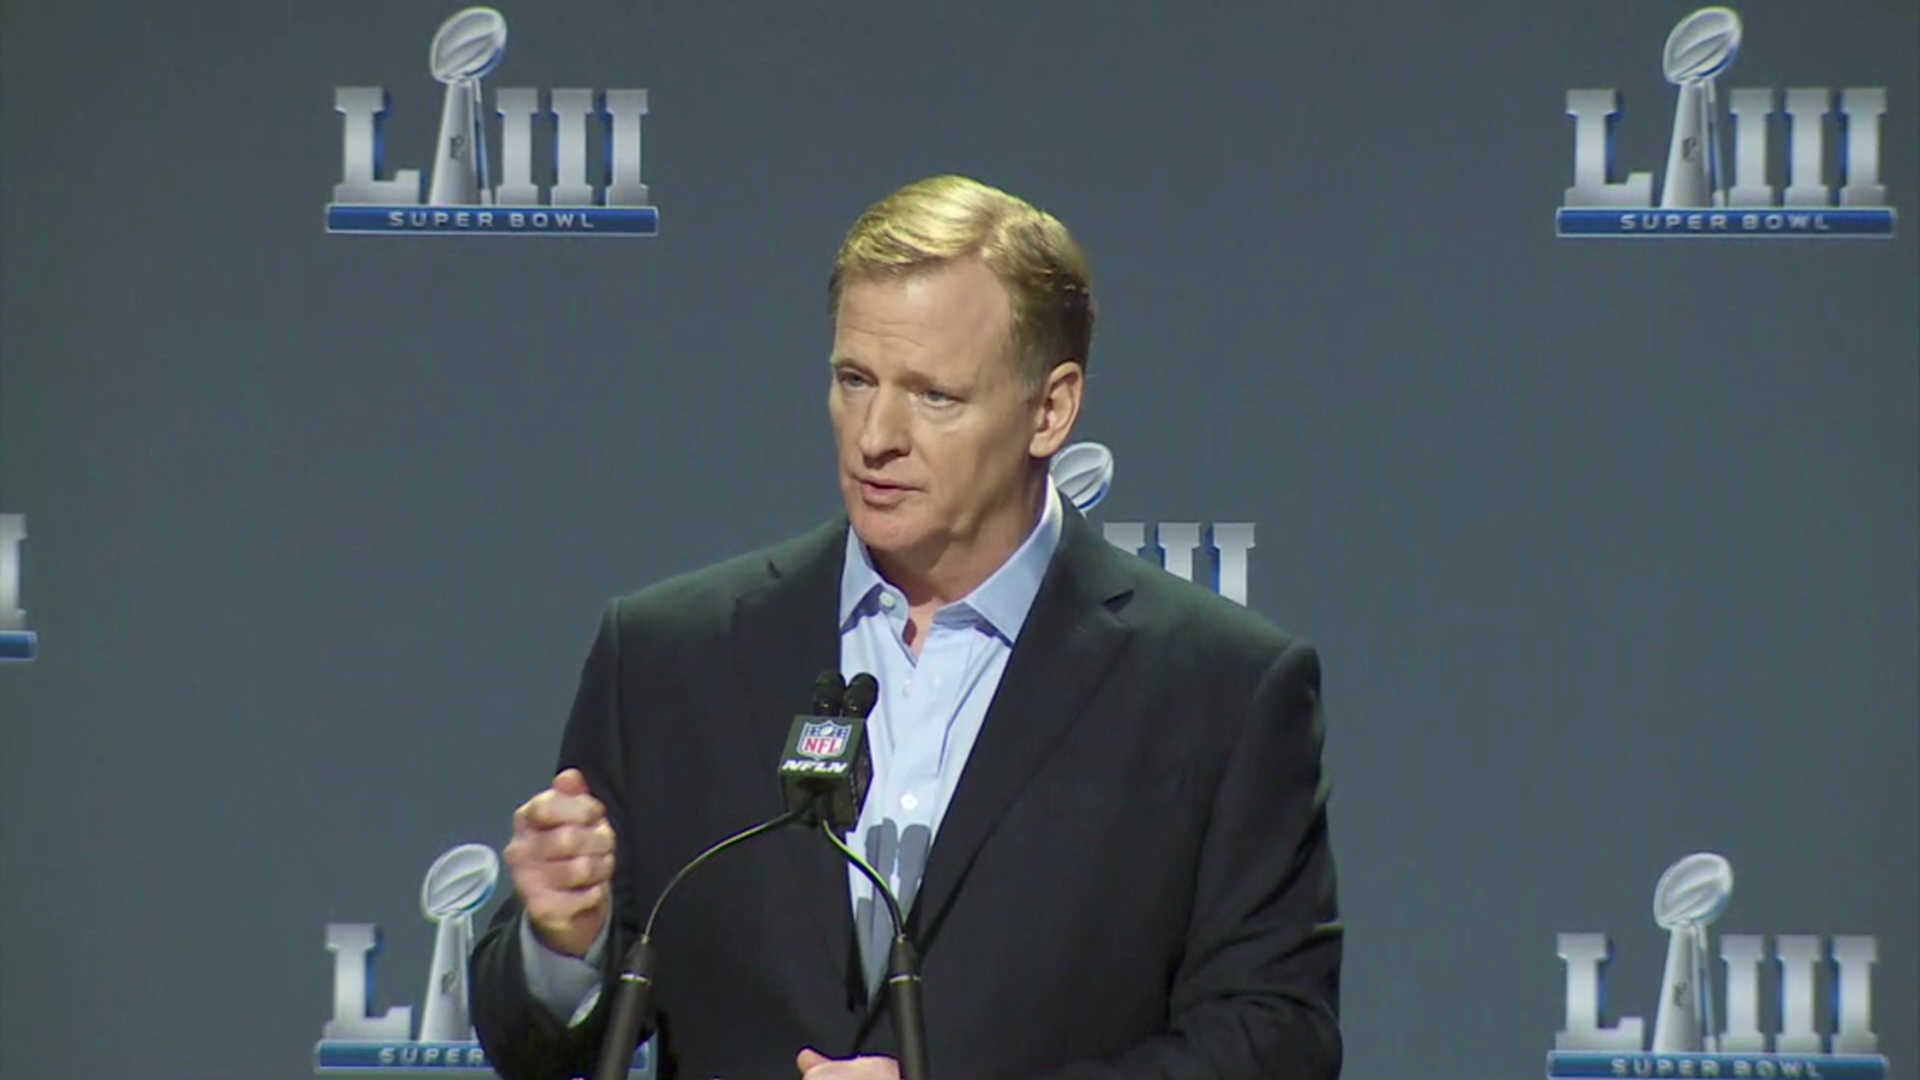 NFL Commissioner Roger Goodell addressed the frustrations of New Orleans Saints fans at his annual 'State of the League' address before the Super Bowl.